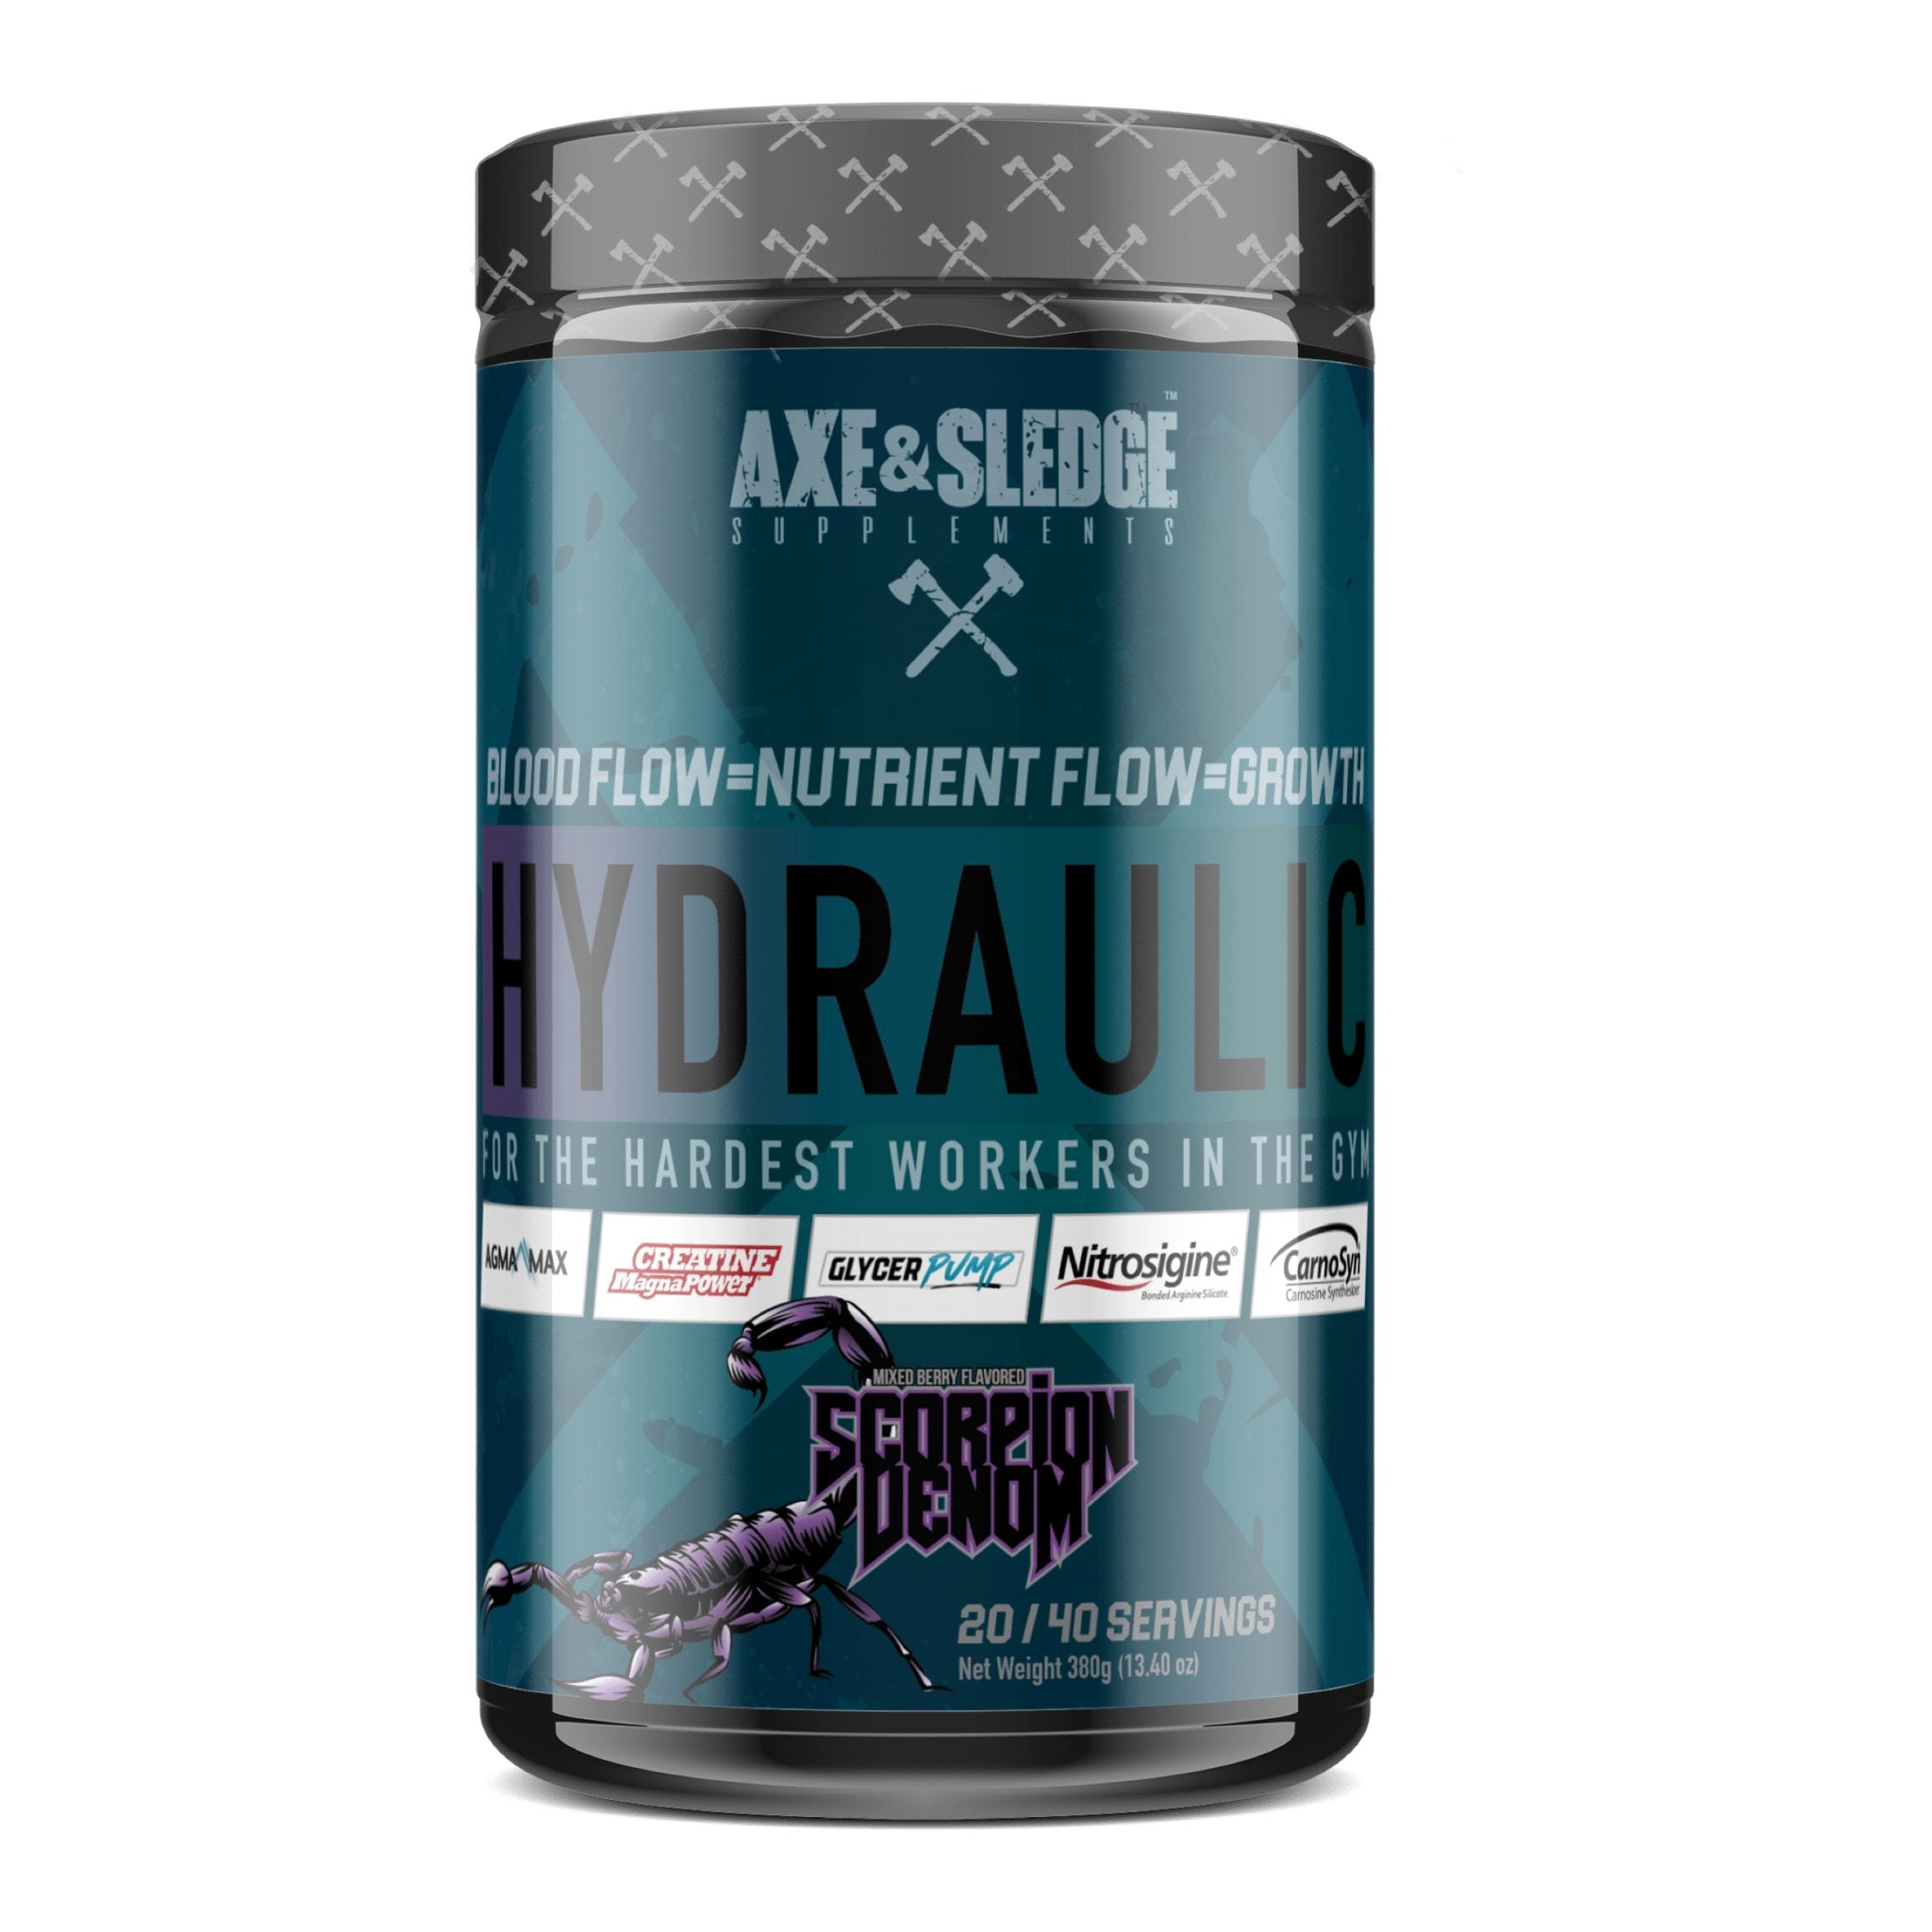 AXE & SLEDGEHYDRAULICMuscle Pump FormulaRED SUPPS